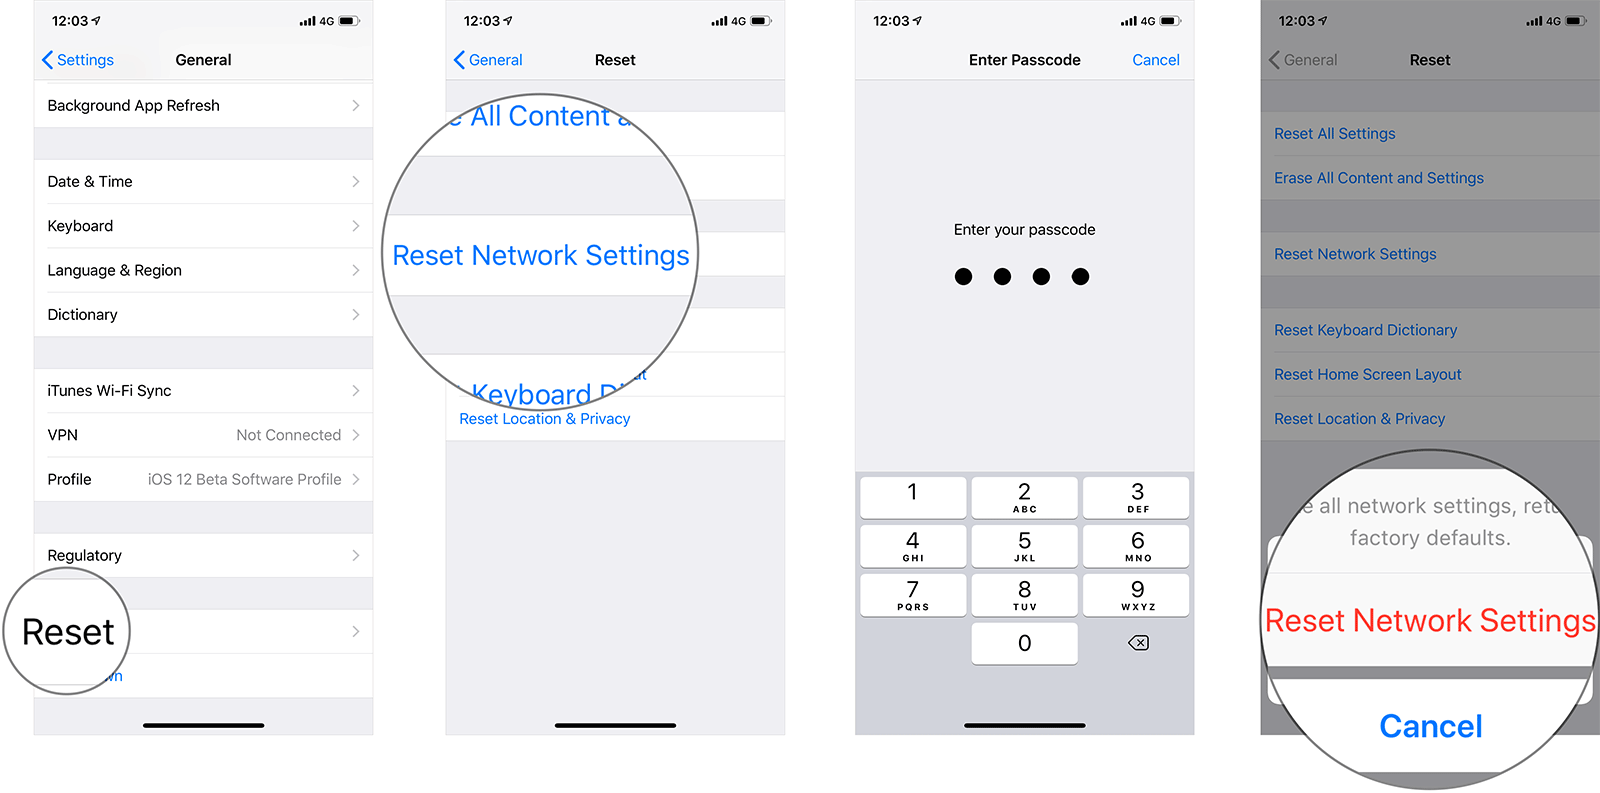 Personal hotspot missing from iPhone